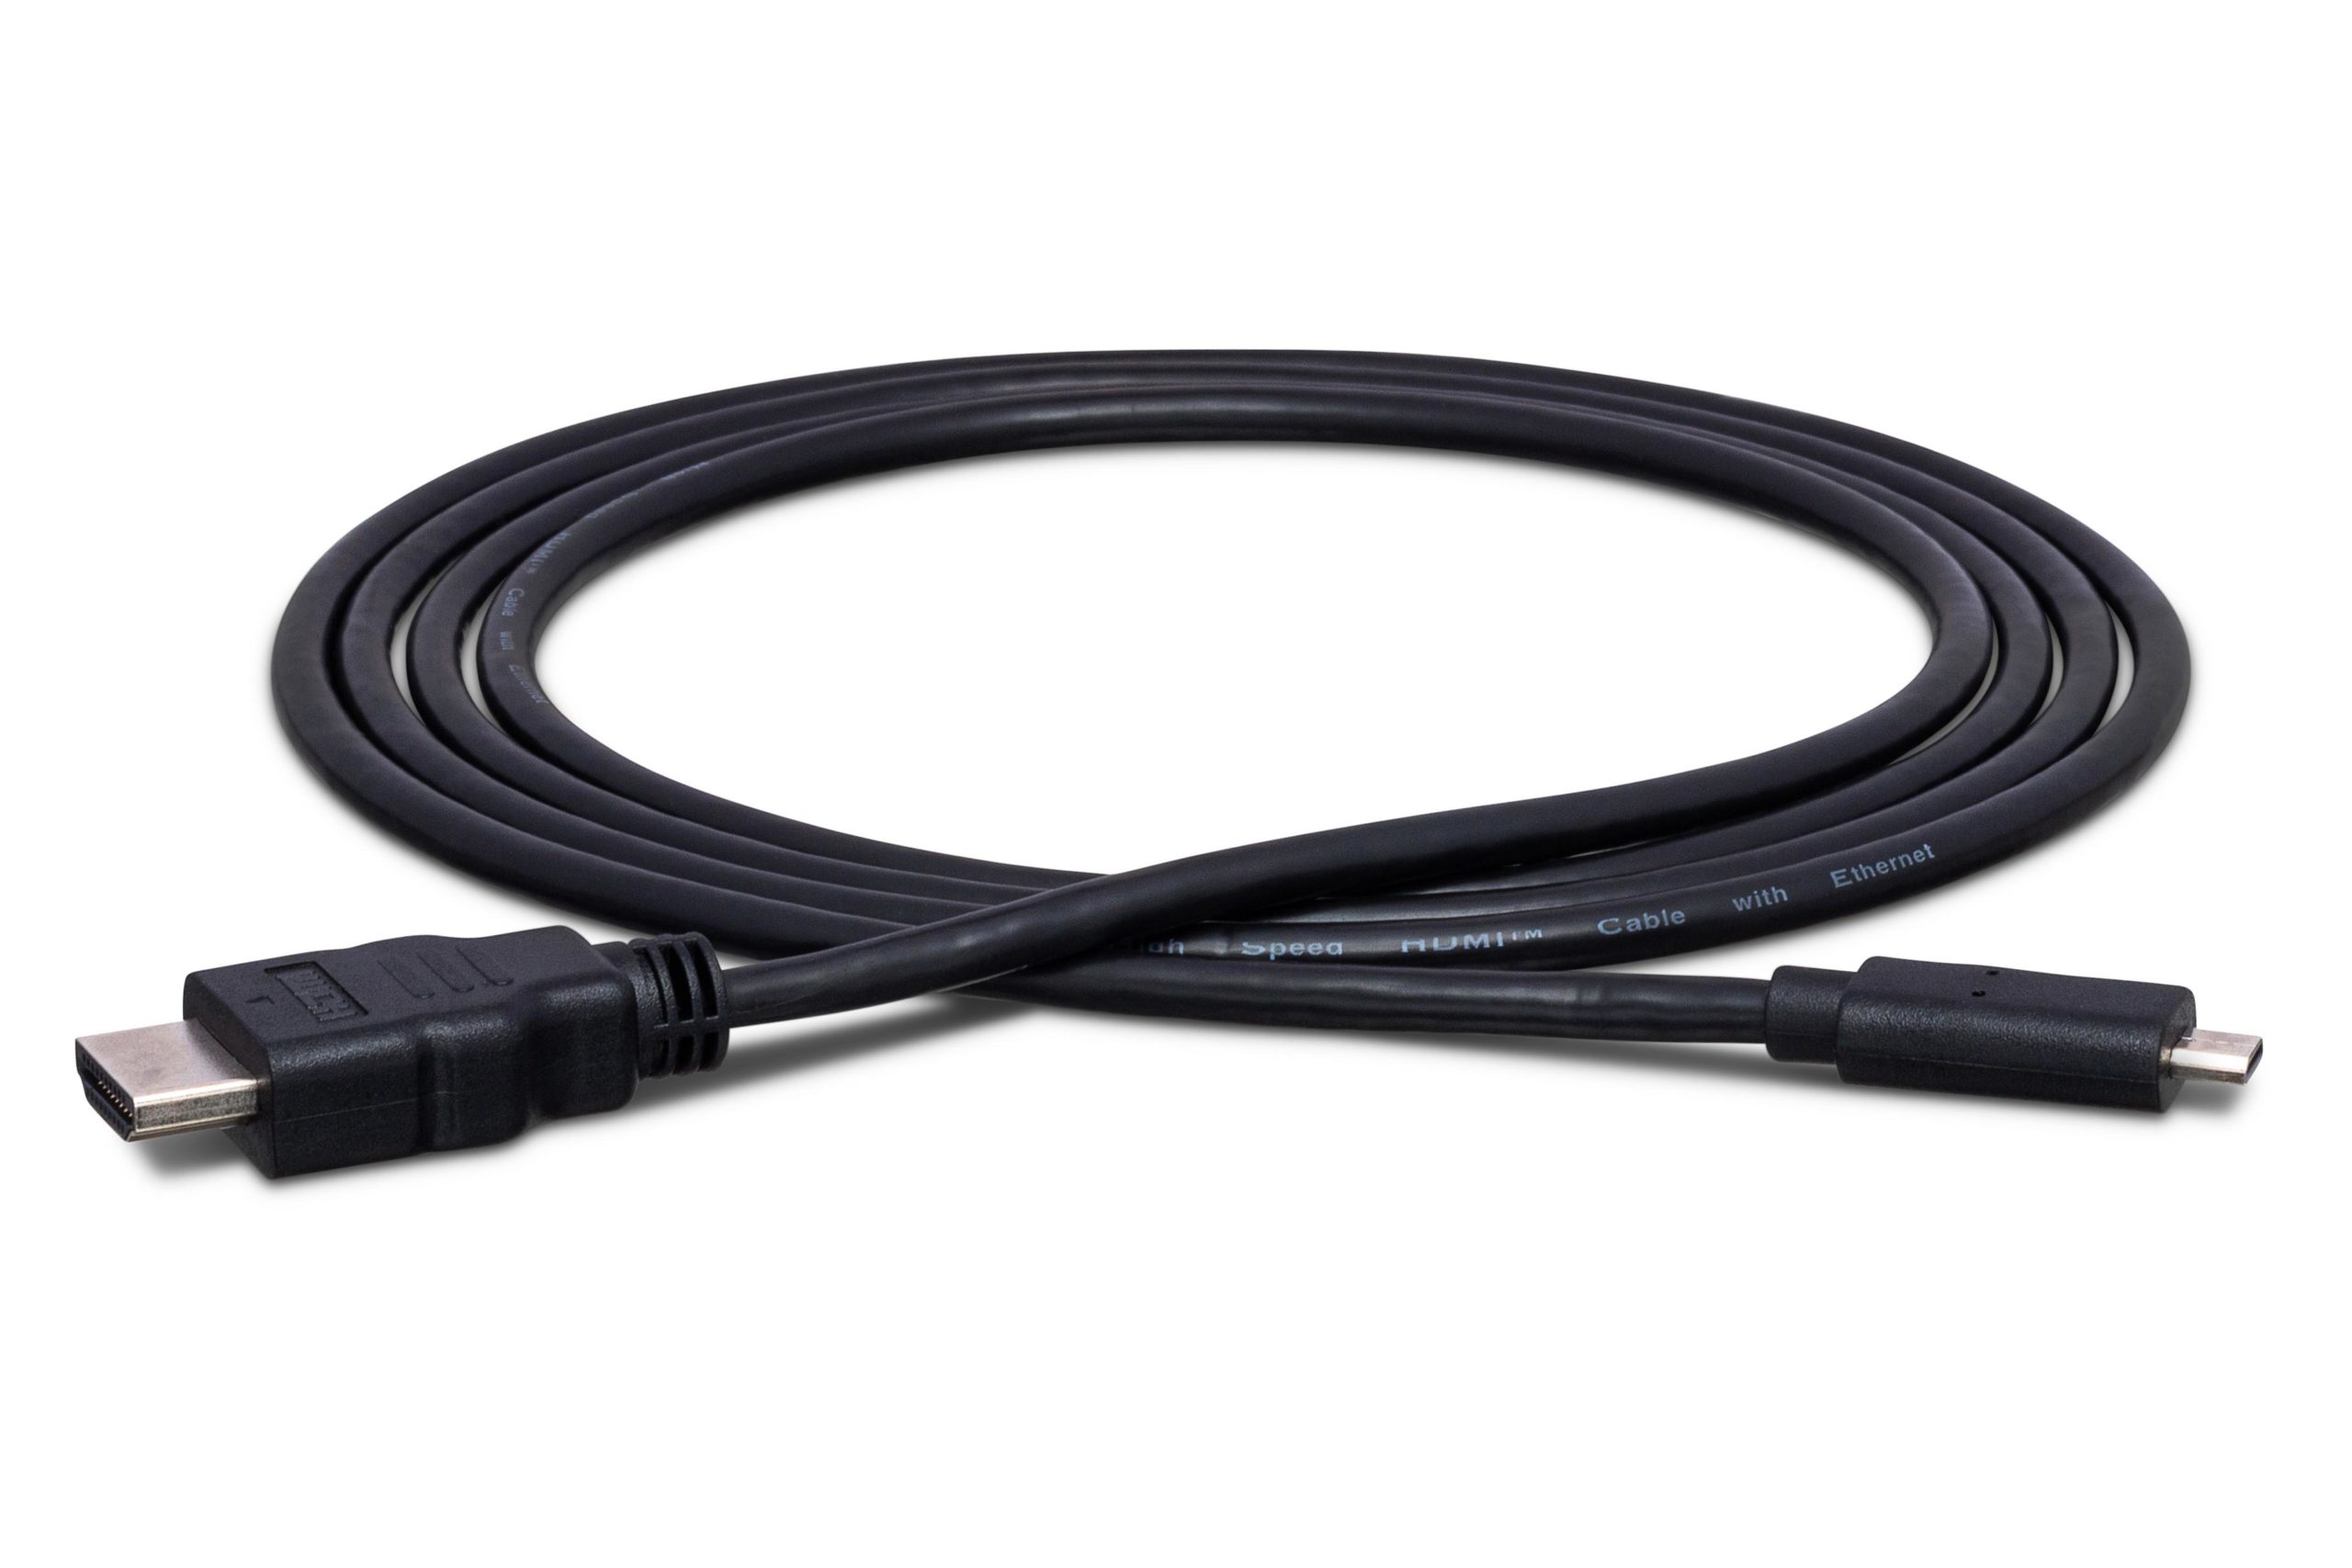 GE 6 ft. HDMI Cable with Ethernet, Black